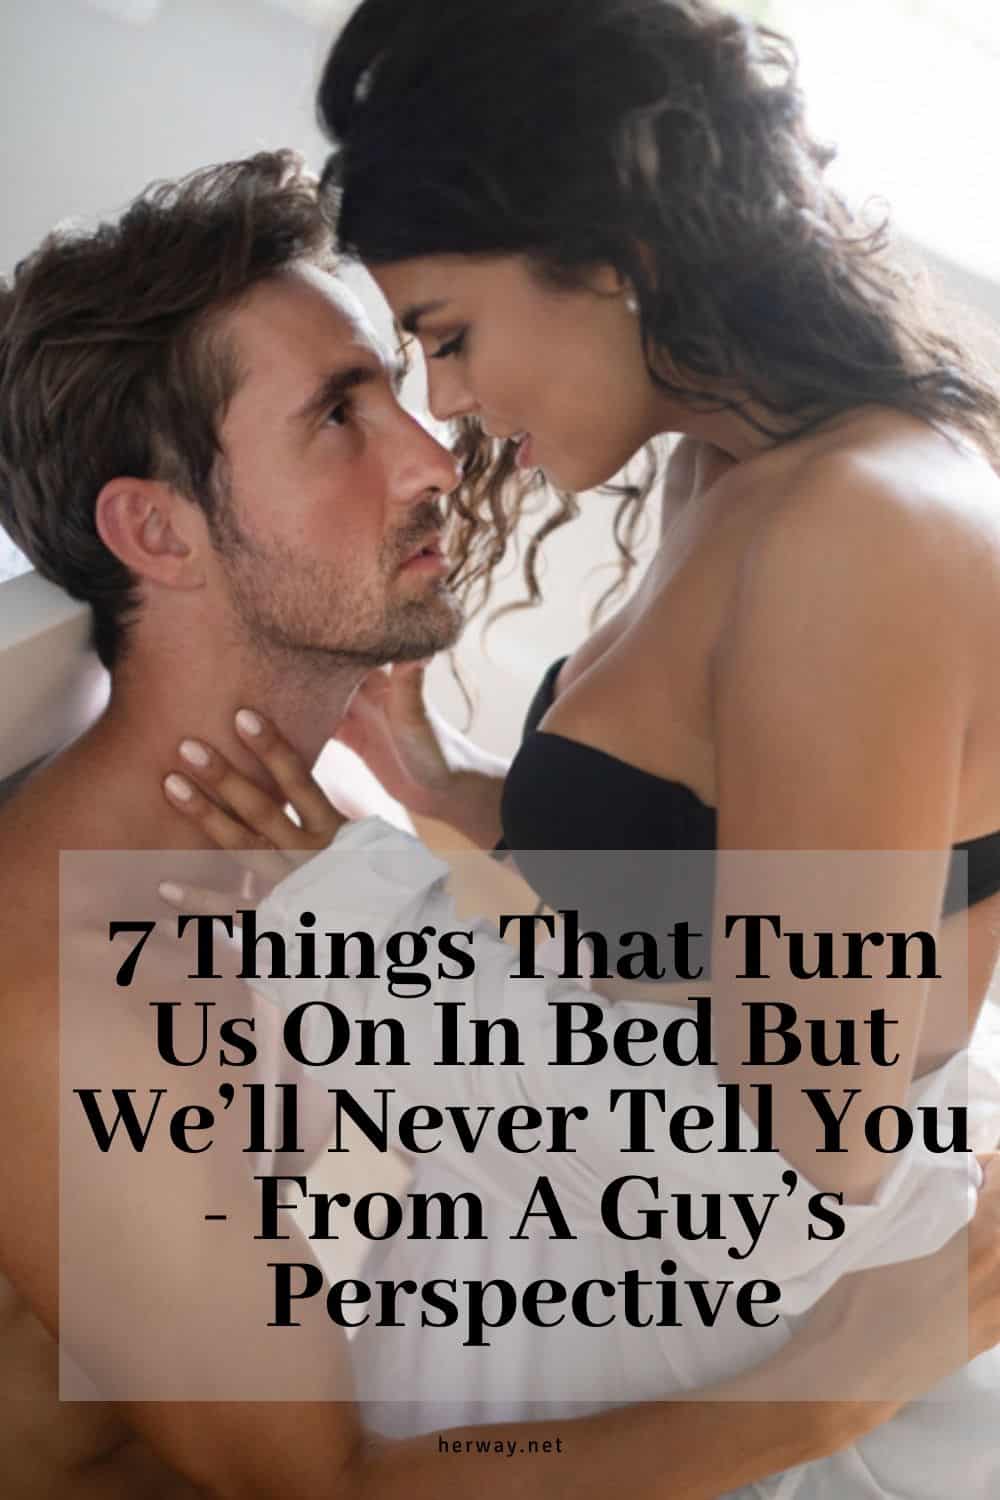 7 Things That Turn Us On In Bed But We’ll Never Tell You - From A Guy’s Perspective